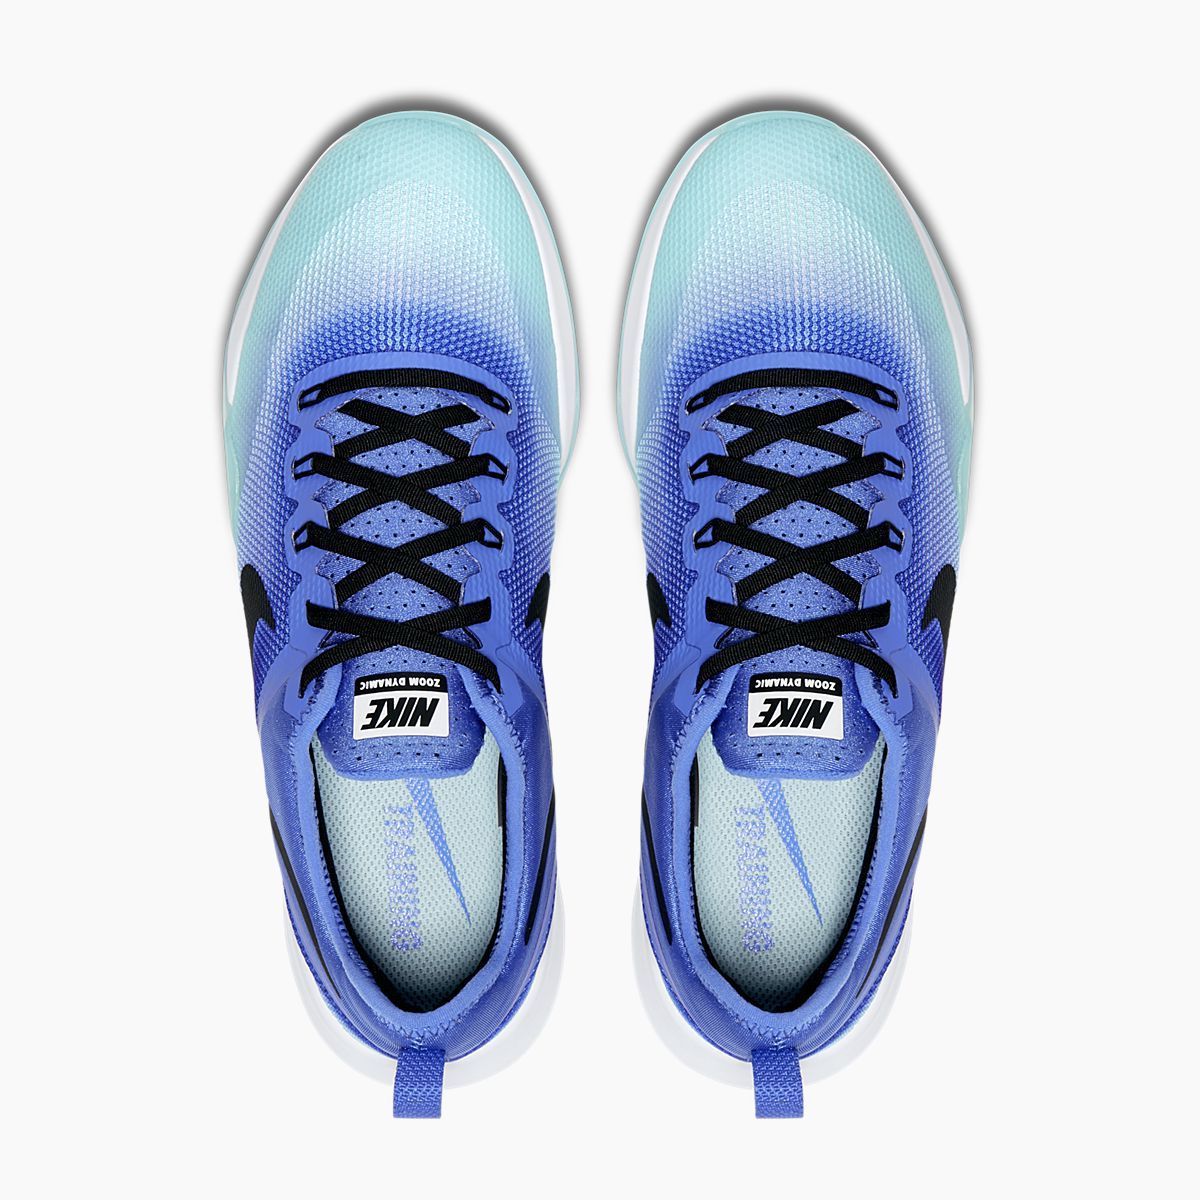 Emulatie werkplaats Kreunt Nike Air Zoom TR Dynamic Fade Women's Trainers – Stockpoint Apparel Outlet